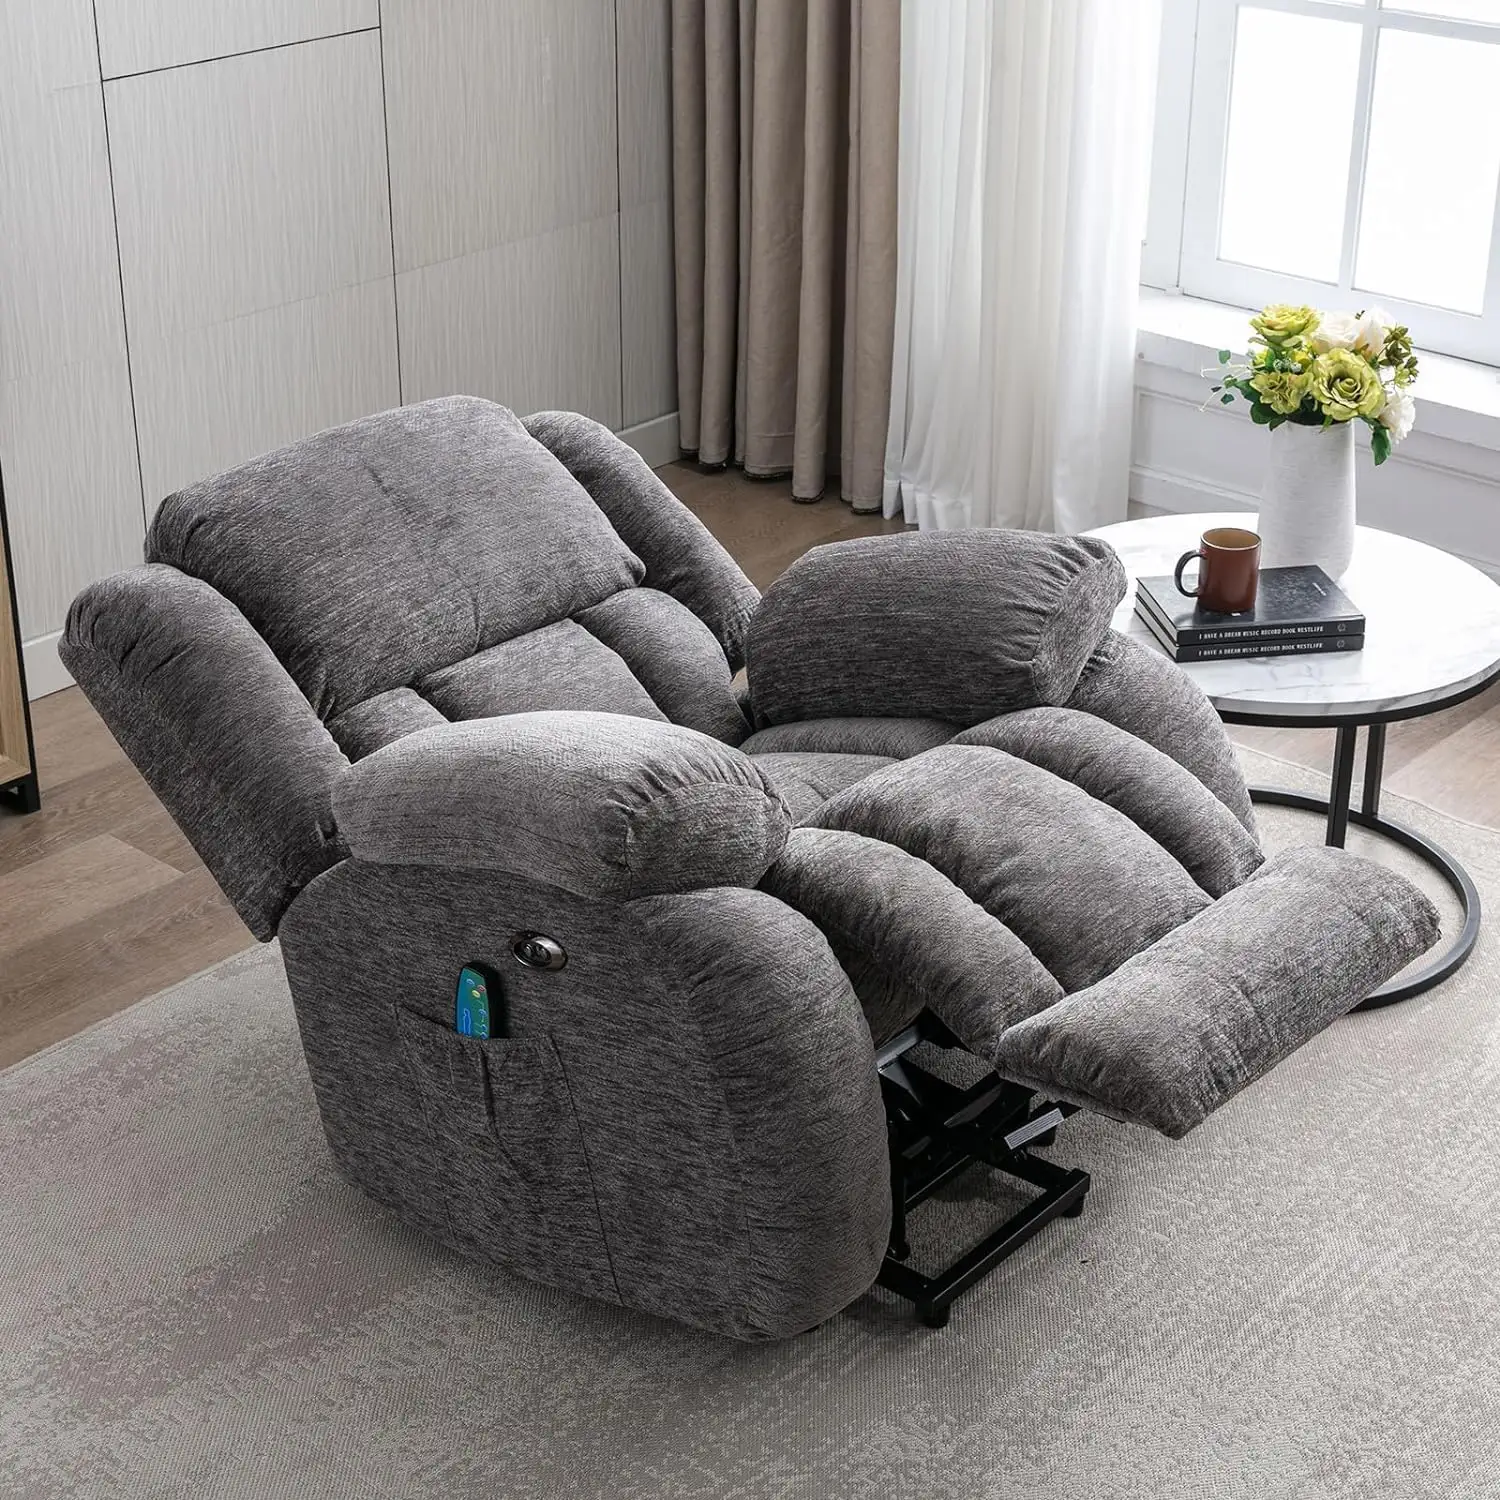 Modern Single Electric Power Lift Recliner Chair With Heat And USB Port For Elderly Home Theater Sitting-Available In Grey